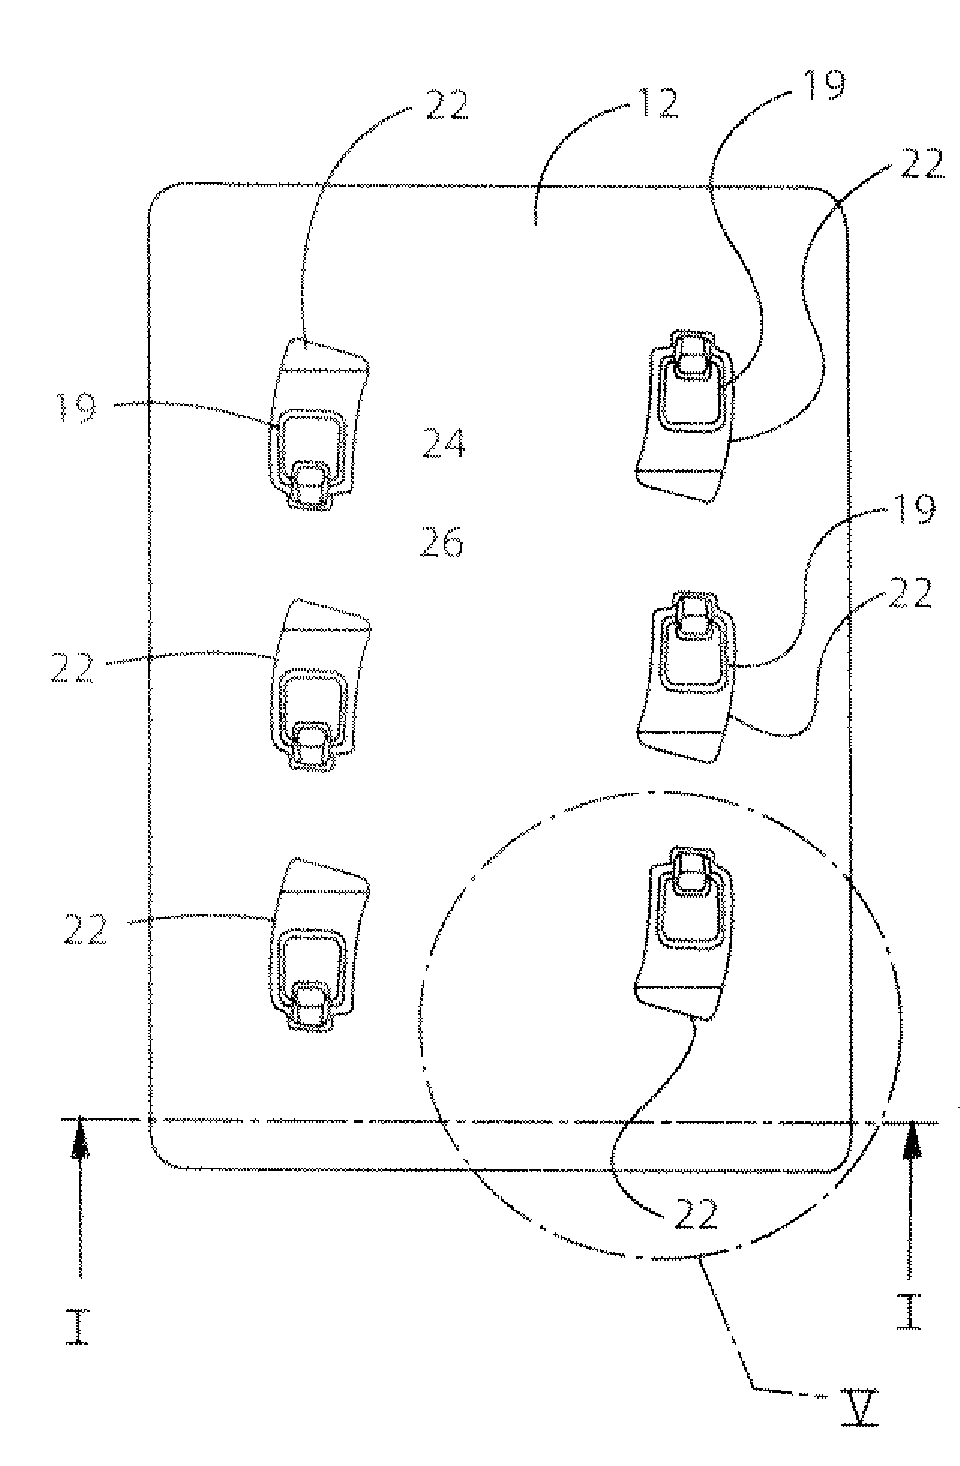 Child Resistant Blister Packaging and a Method of Removing The Contents Therefrom